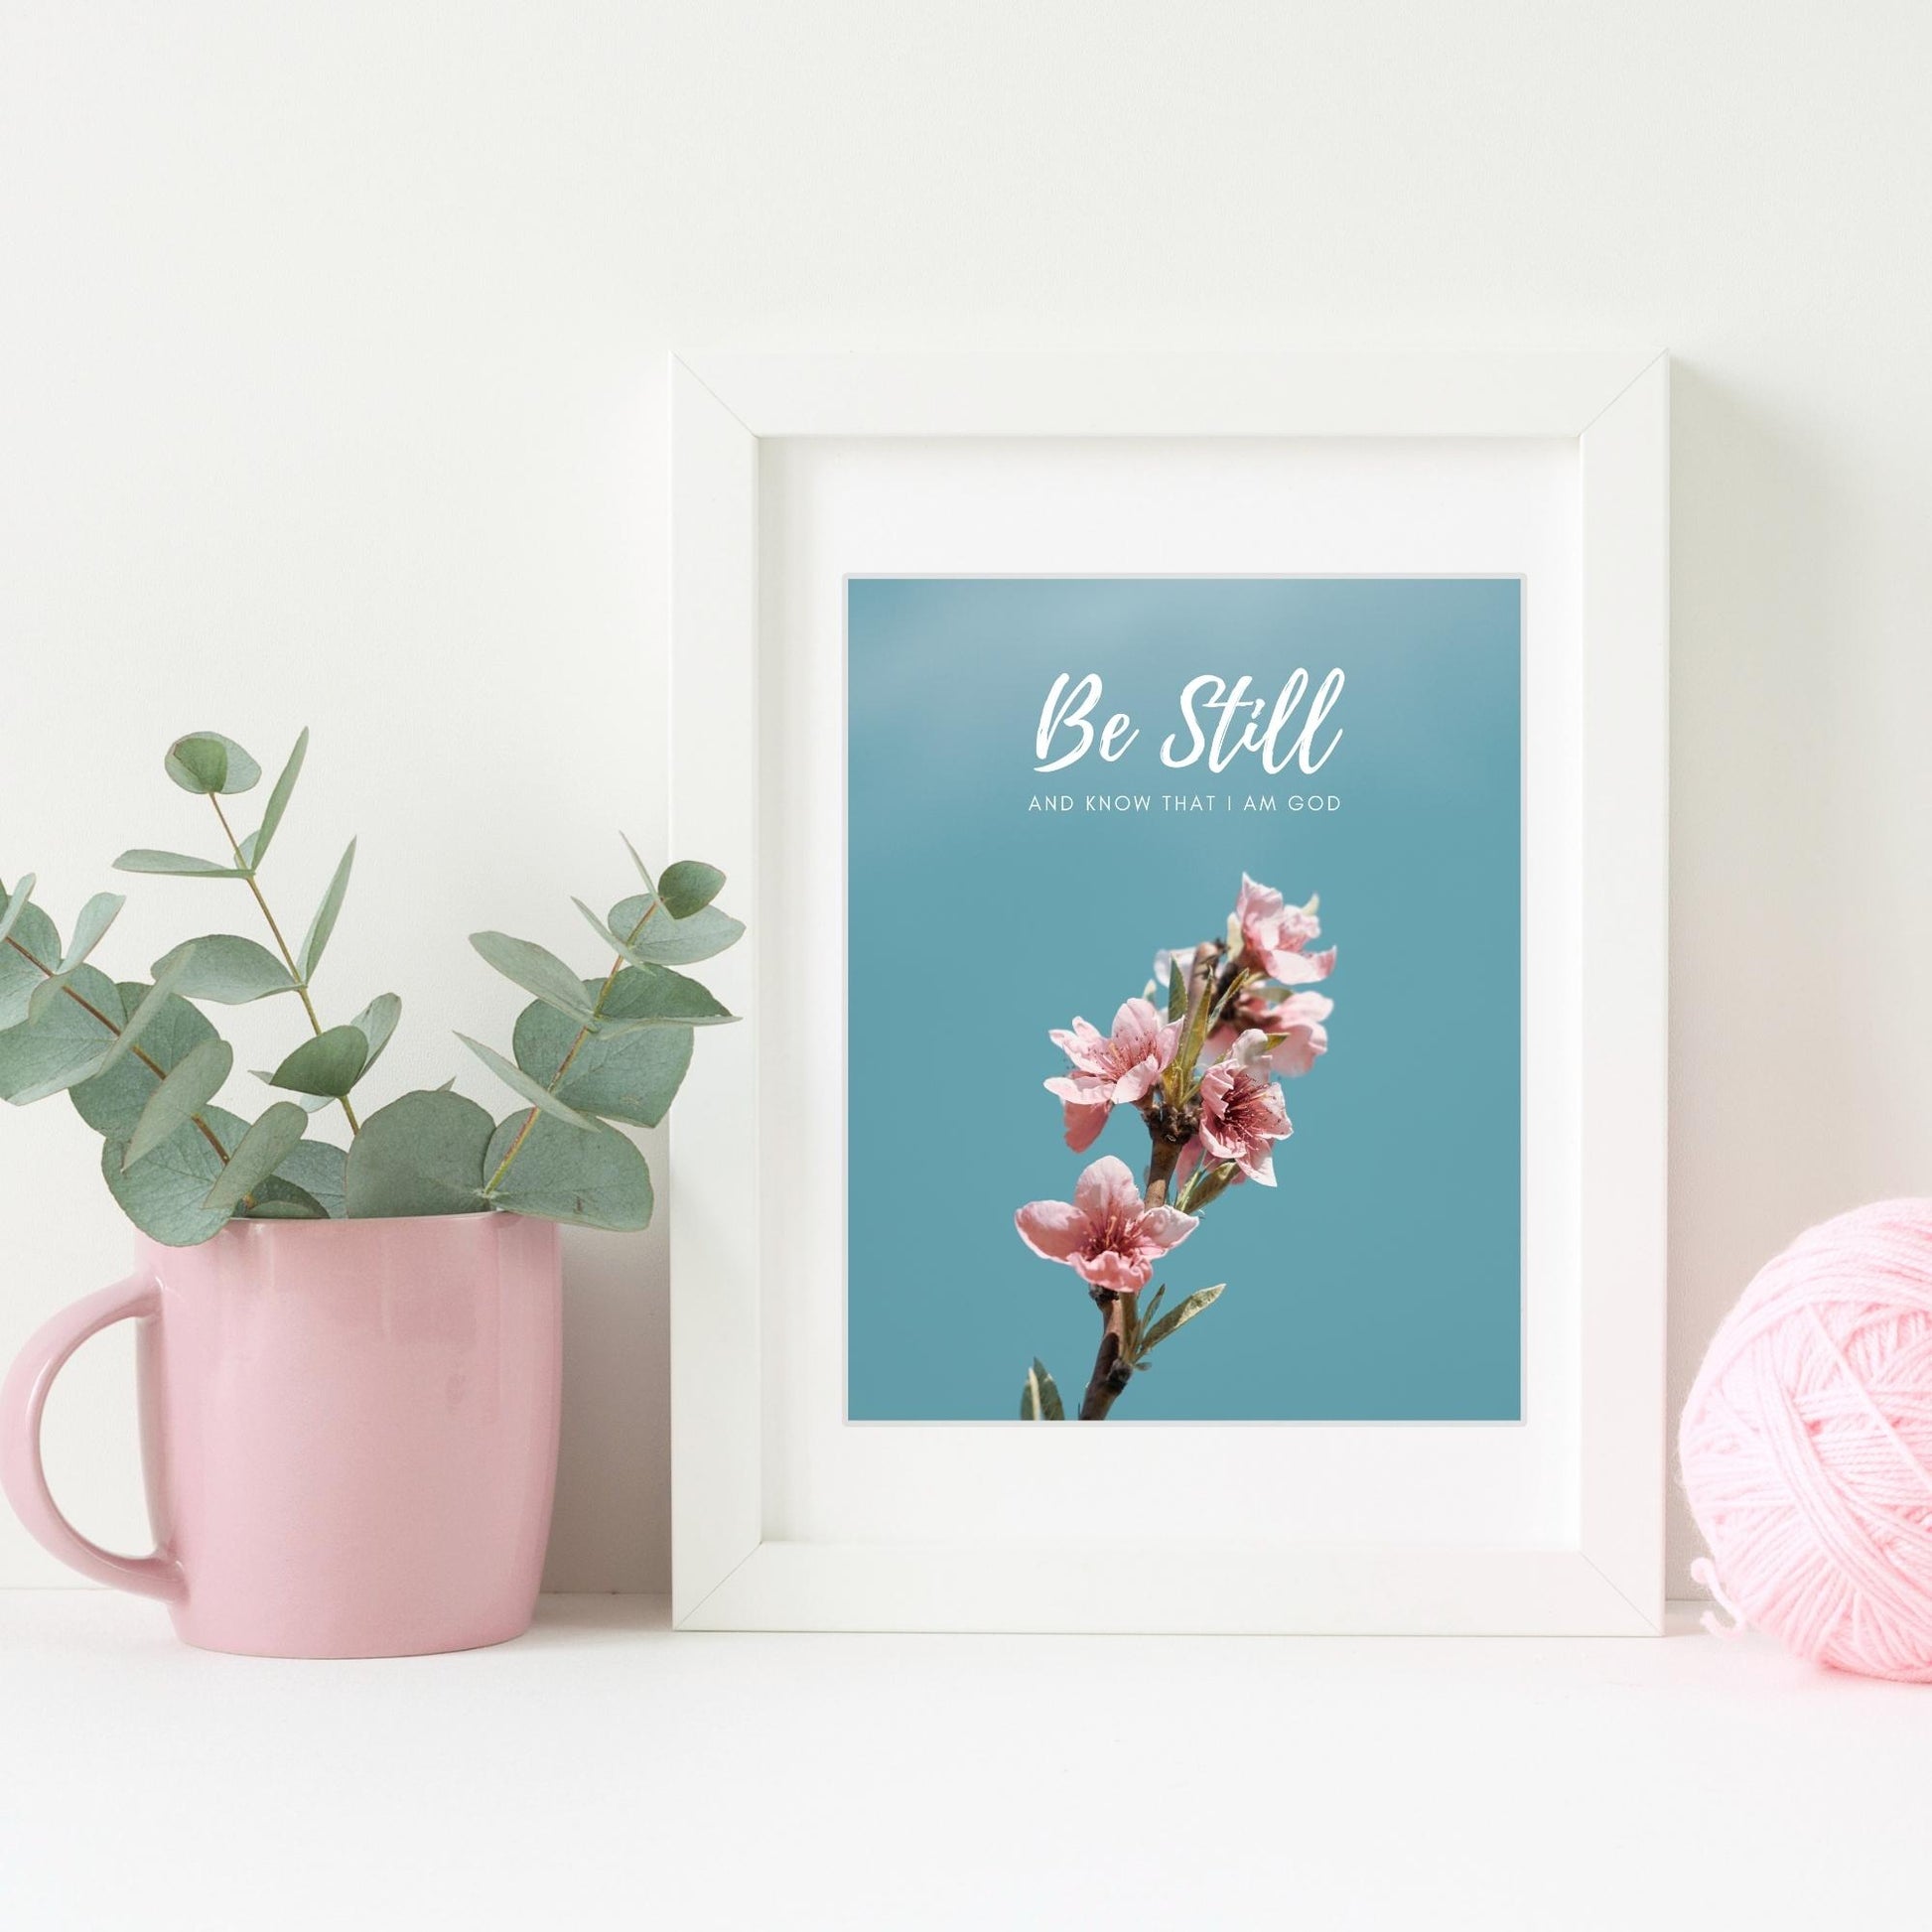 Inspirational Word Art - Be Still and know that I am God - Flower Design Wall Decor (8X10 print) choose from 2 text colors | shown with white text in white frame | oak7west.com